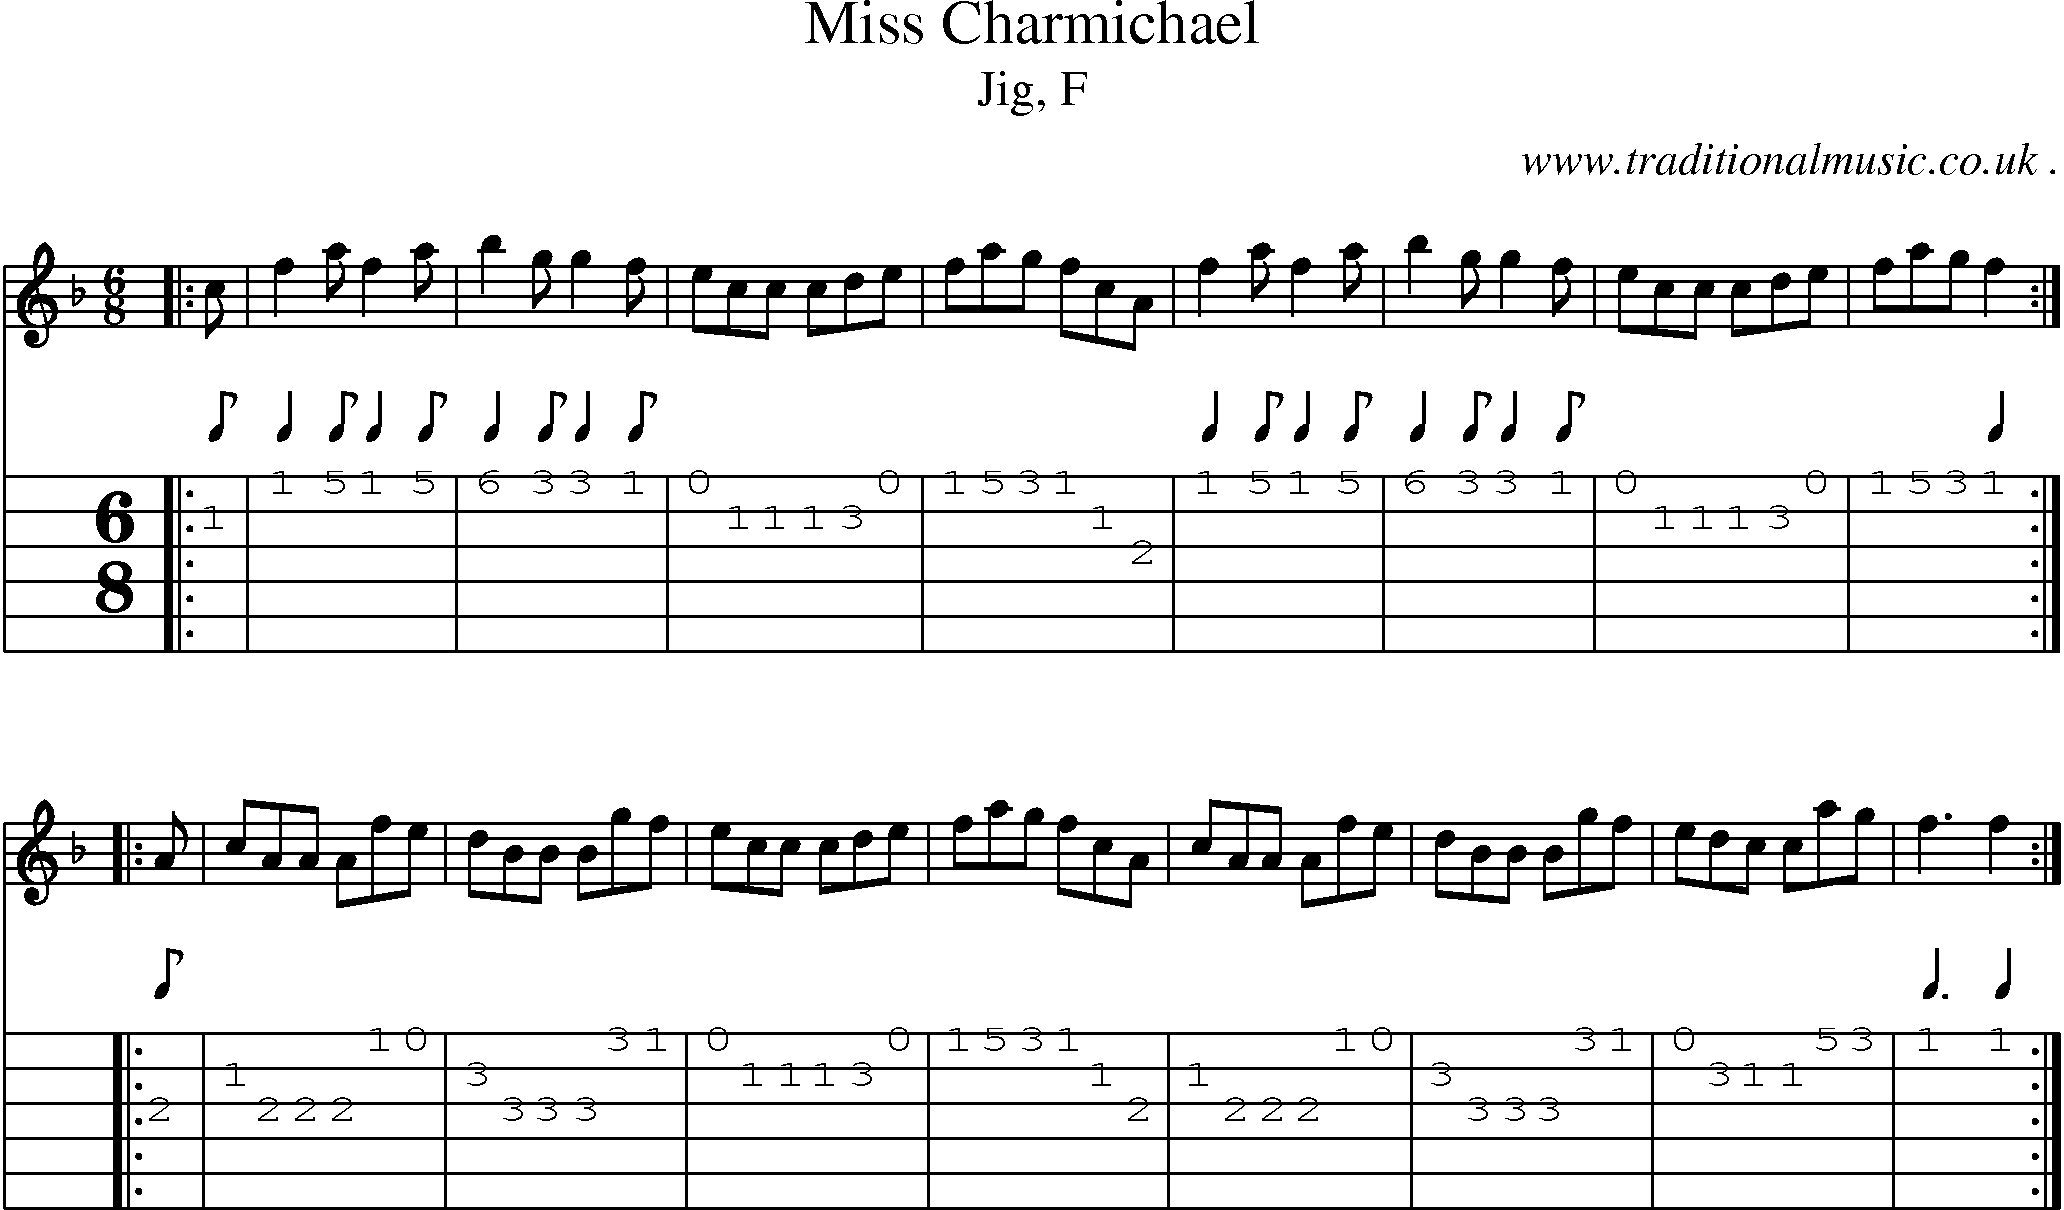 Sheet-music  score, Chords and Guitar Tabs for Miss Charmichael